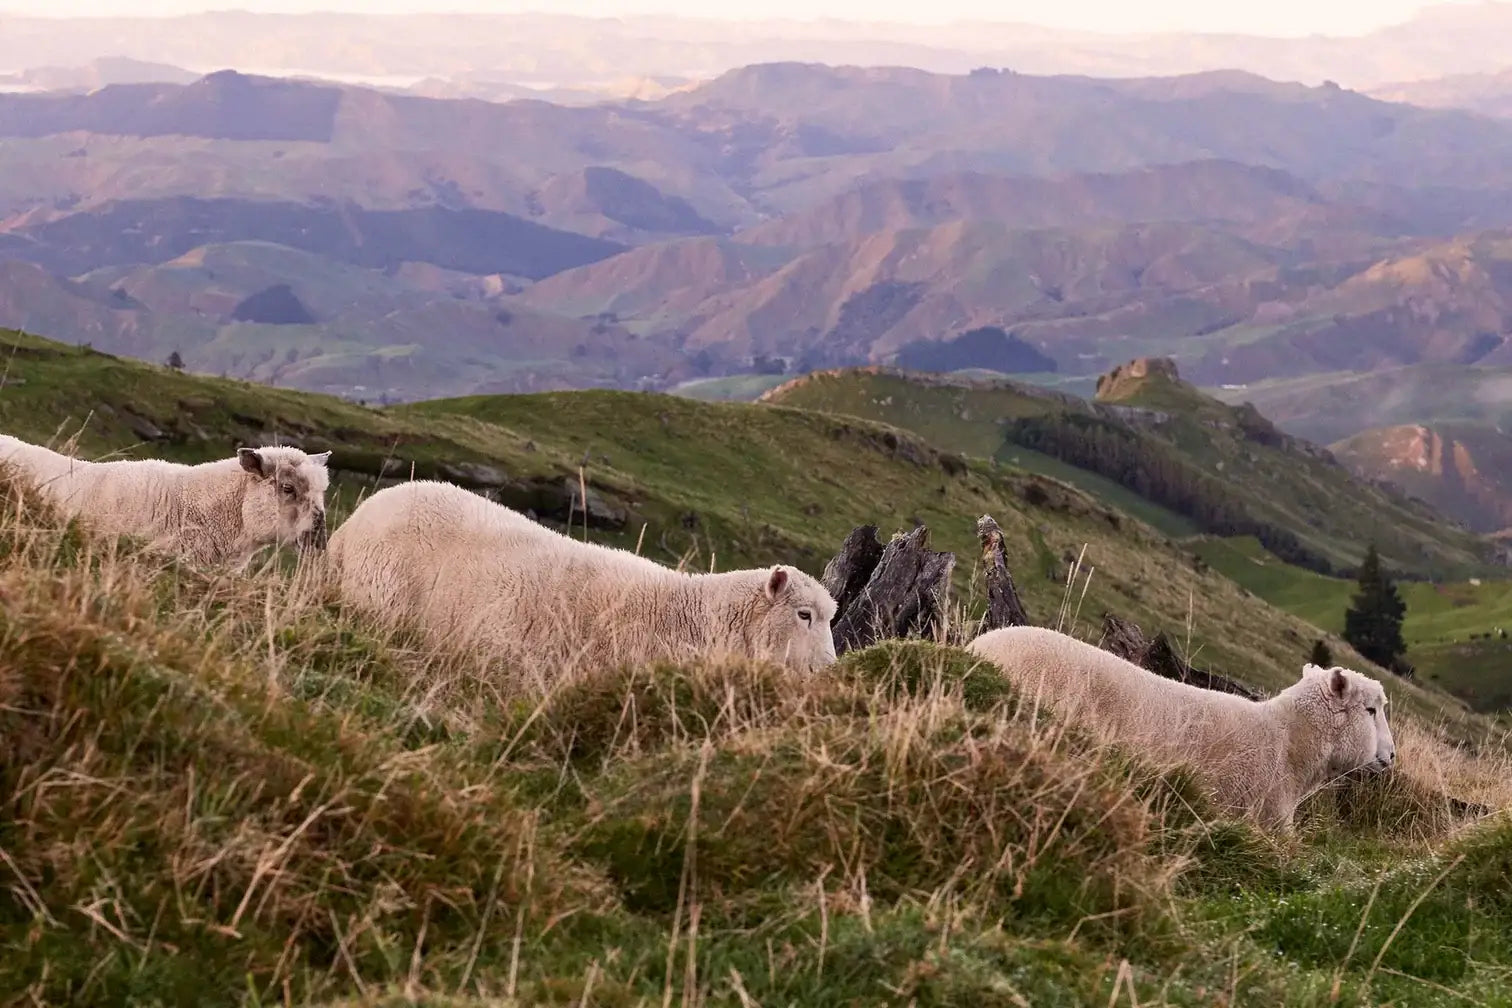 A flock of sheep roaming lush grass hills in New Zealand